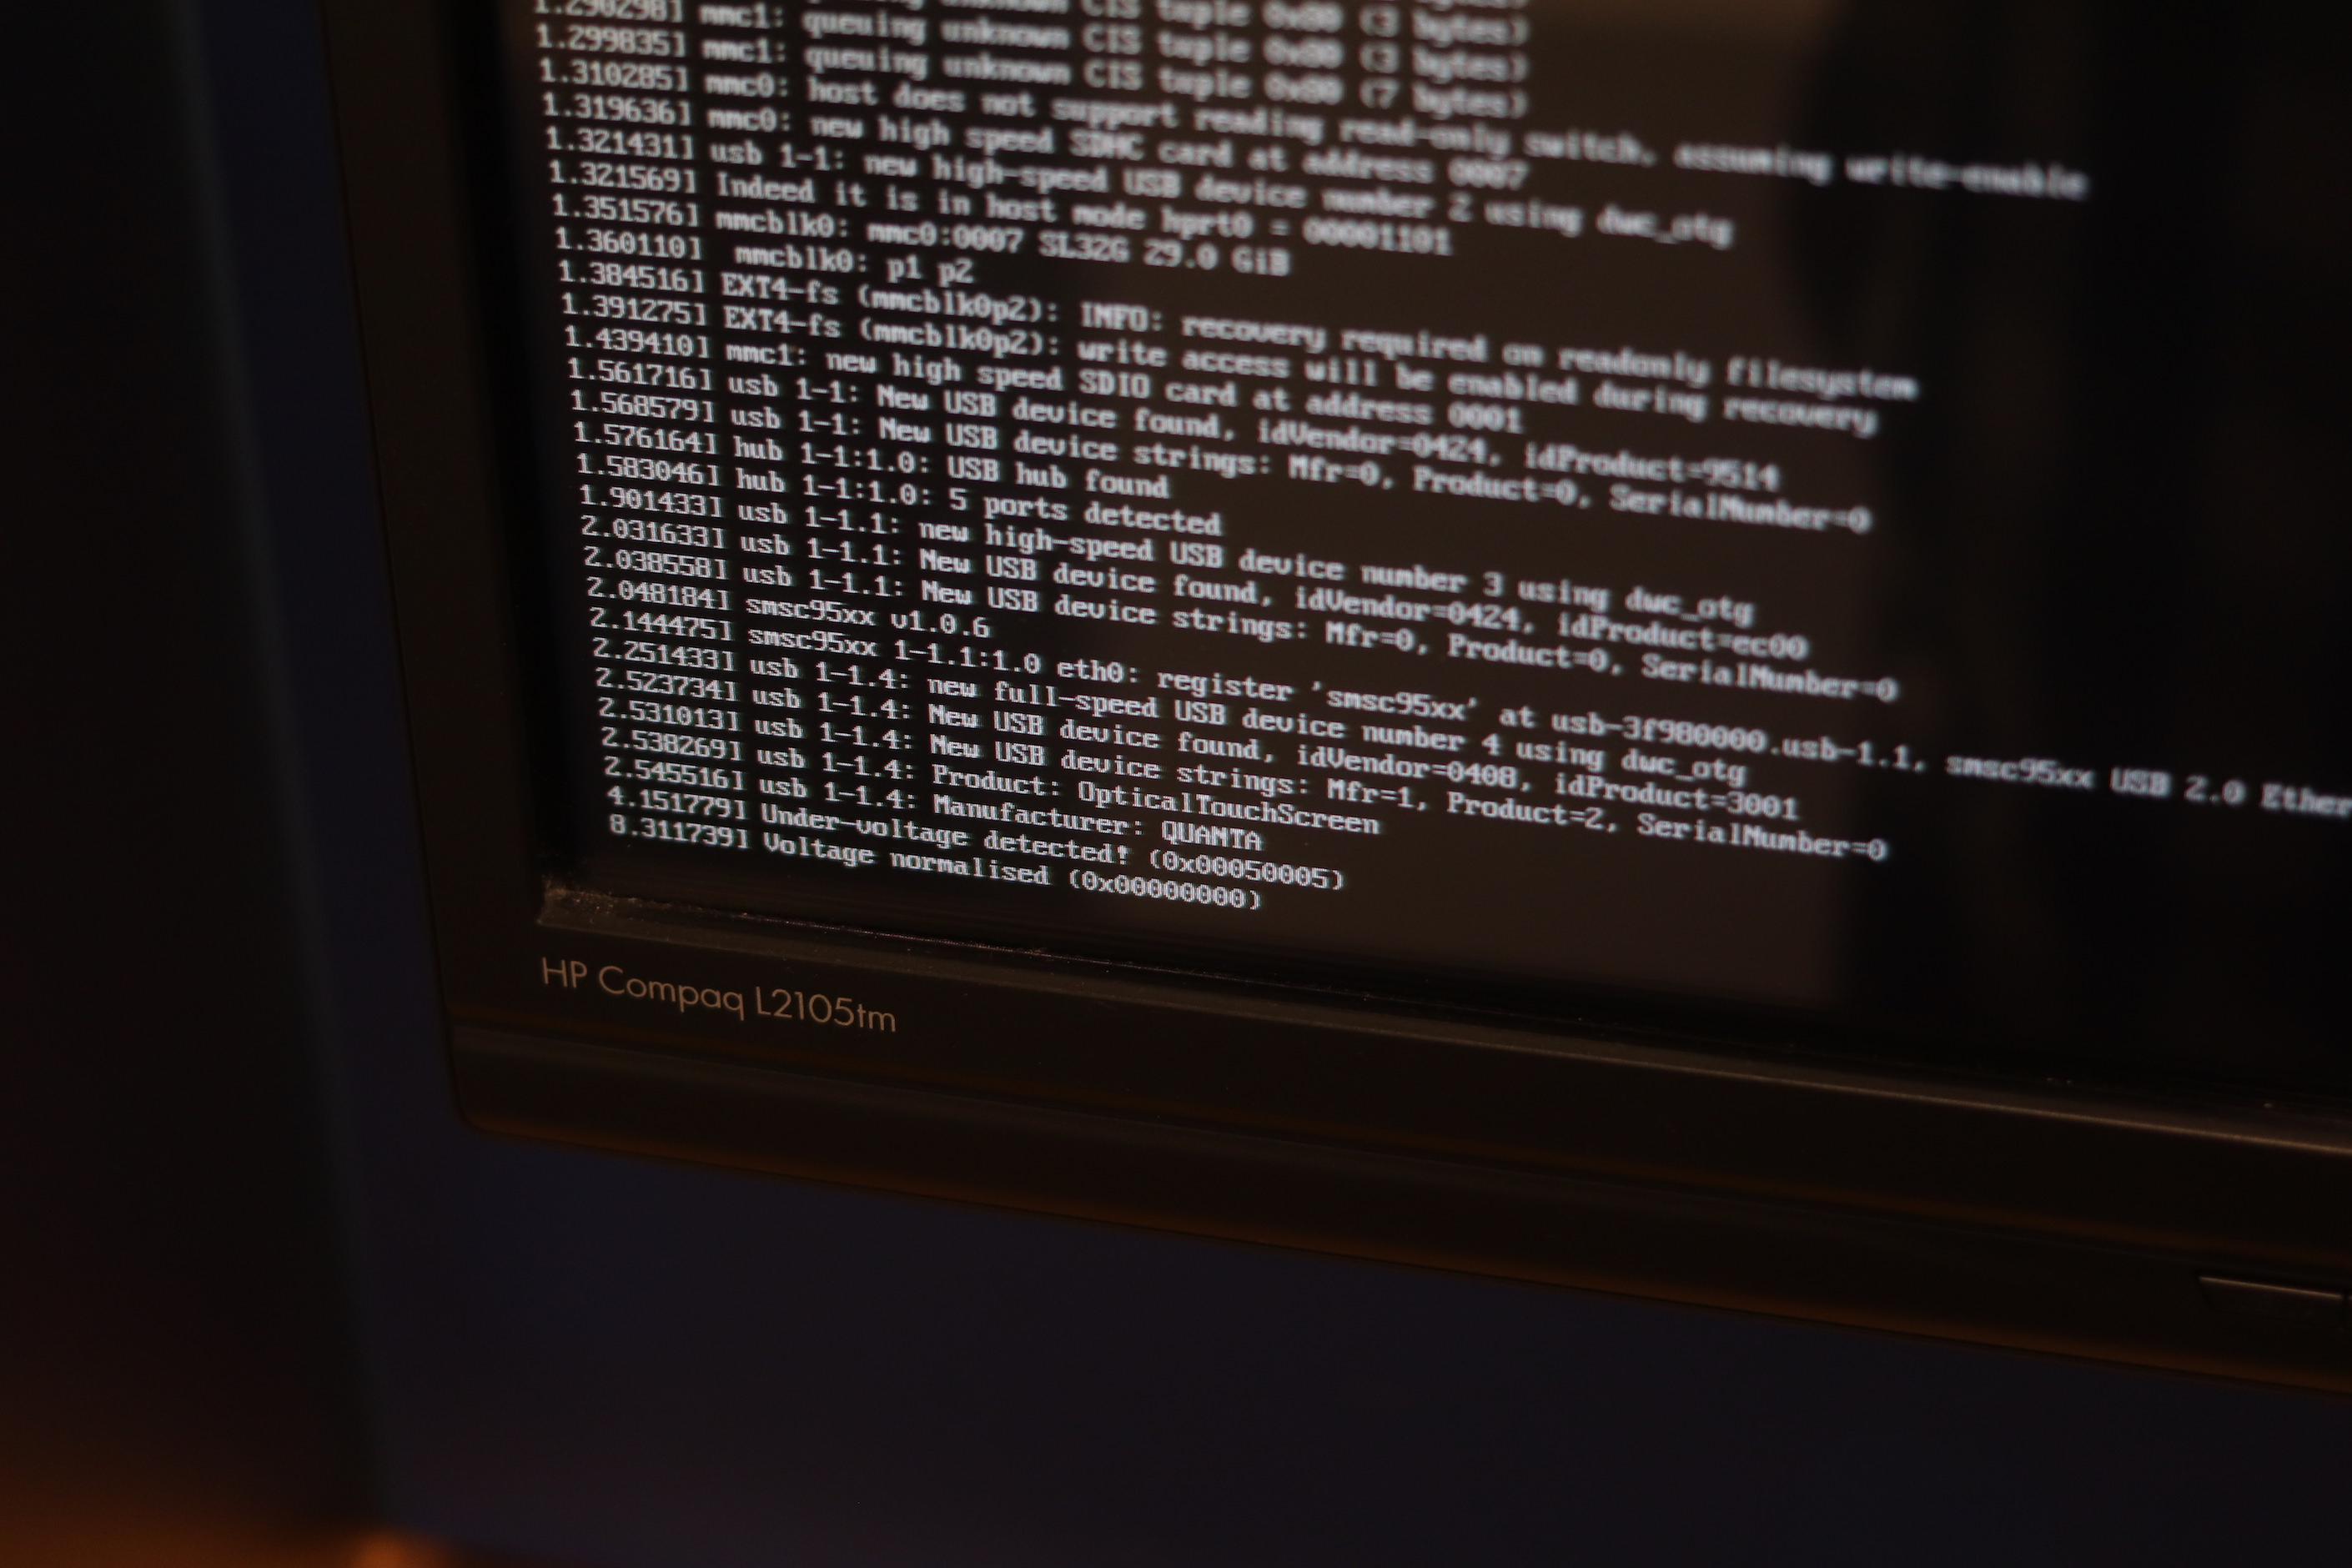 The monitor, showing the Raspberry Pi boot text with references to 'Optical Touch Screen' USB device found.